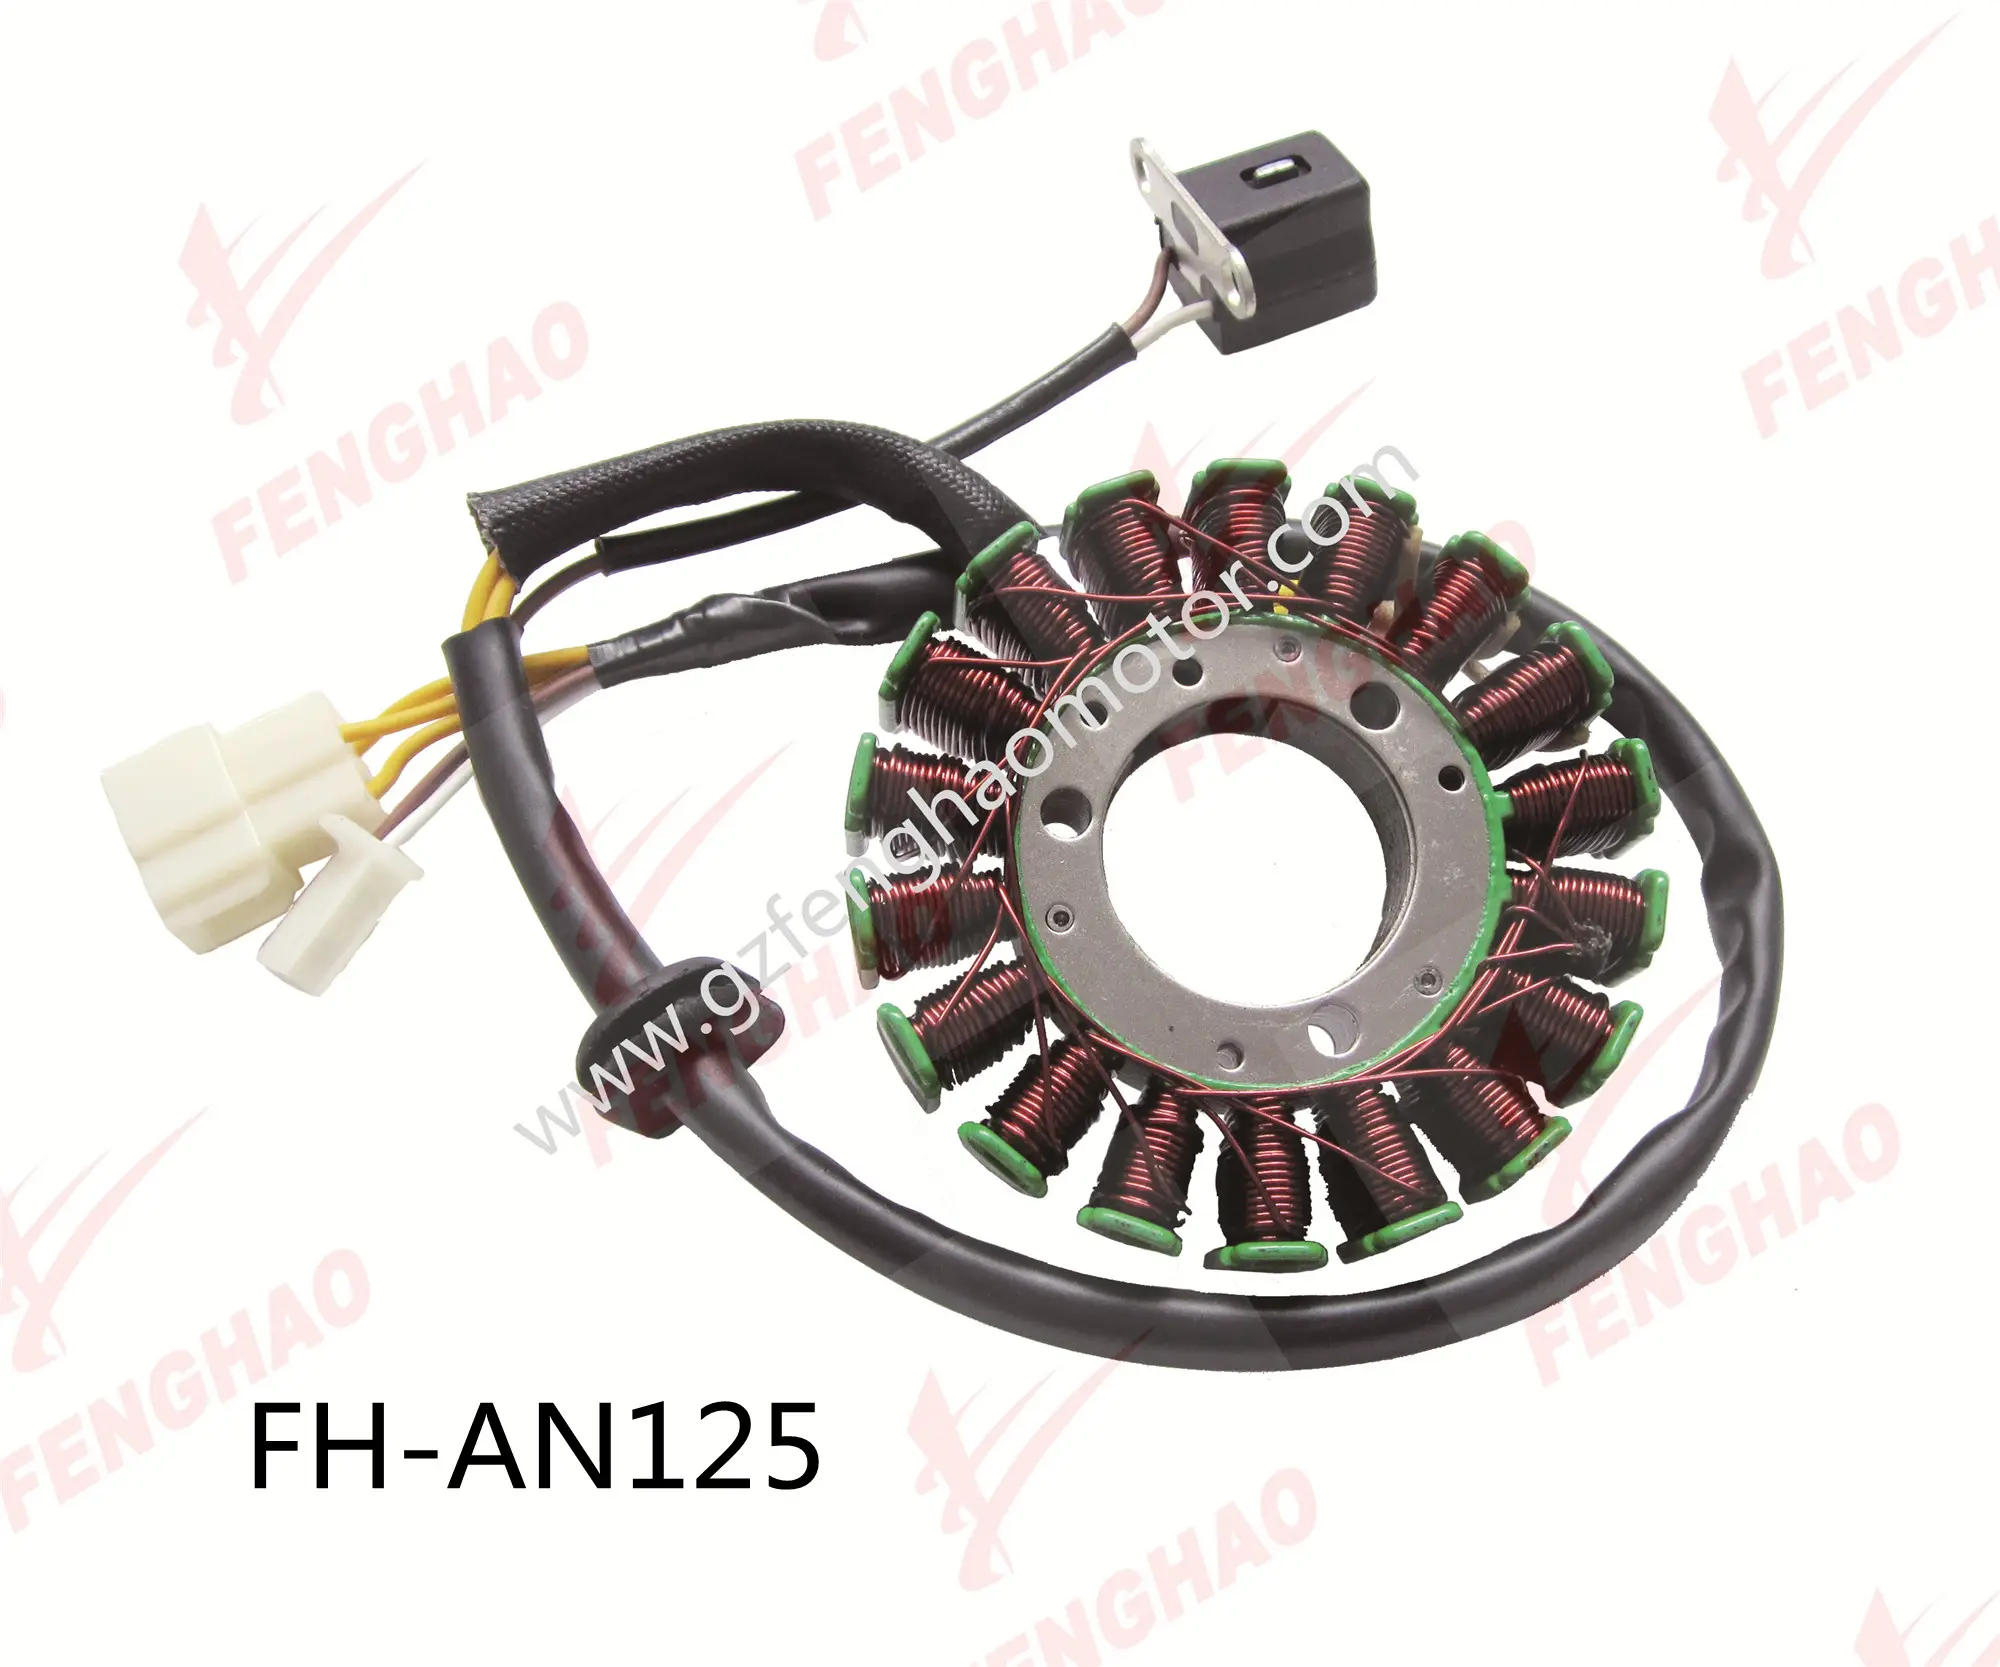 Motorcycle spare parts FOR SUZUKI AN125/GS110//TB50/GN125/AX100/GD110/AX-4 motorcycle magneto stator coil